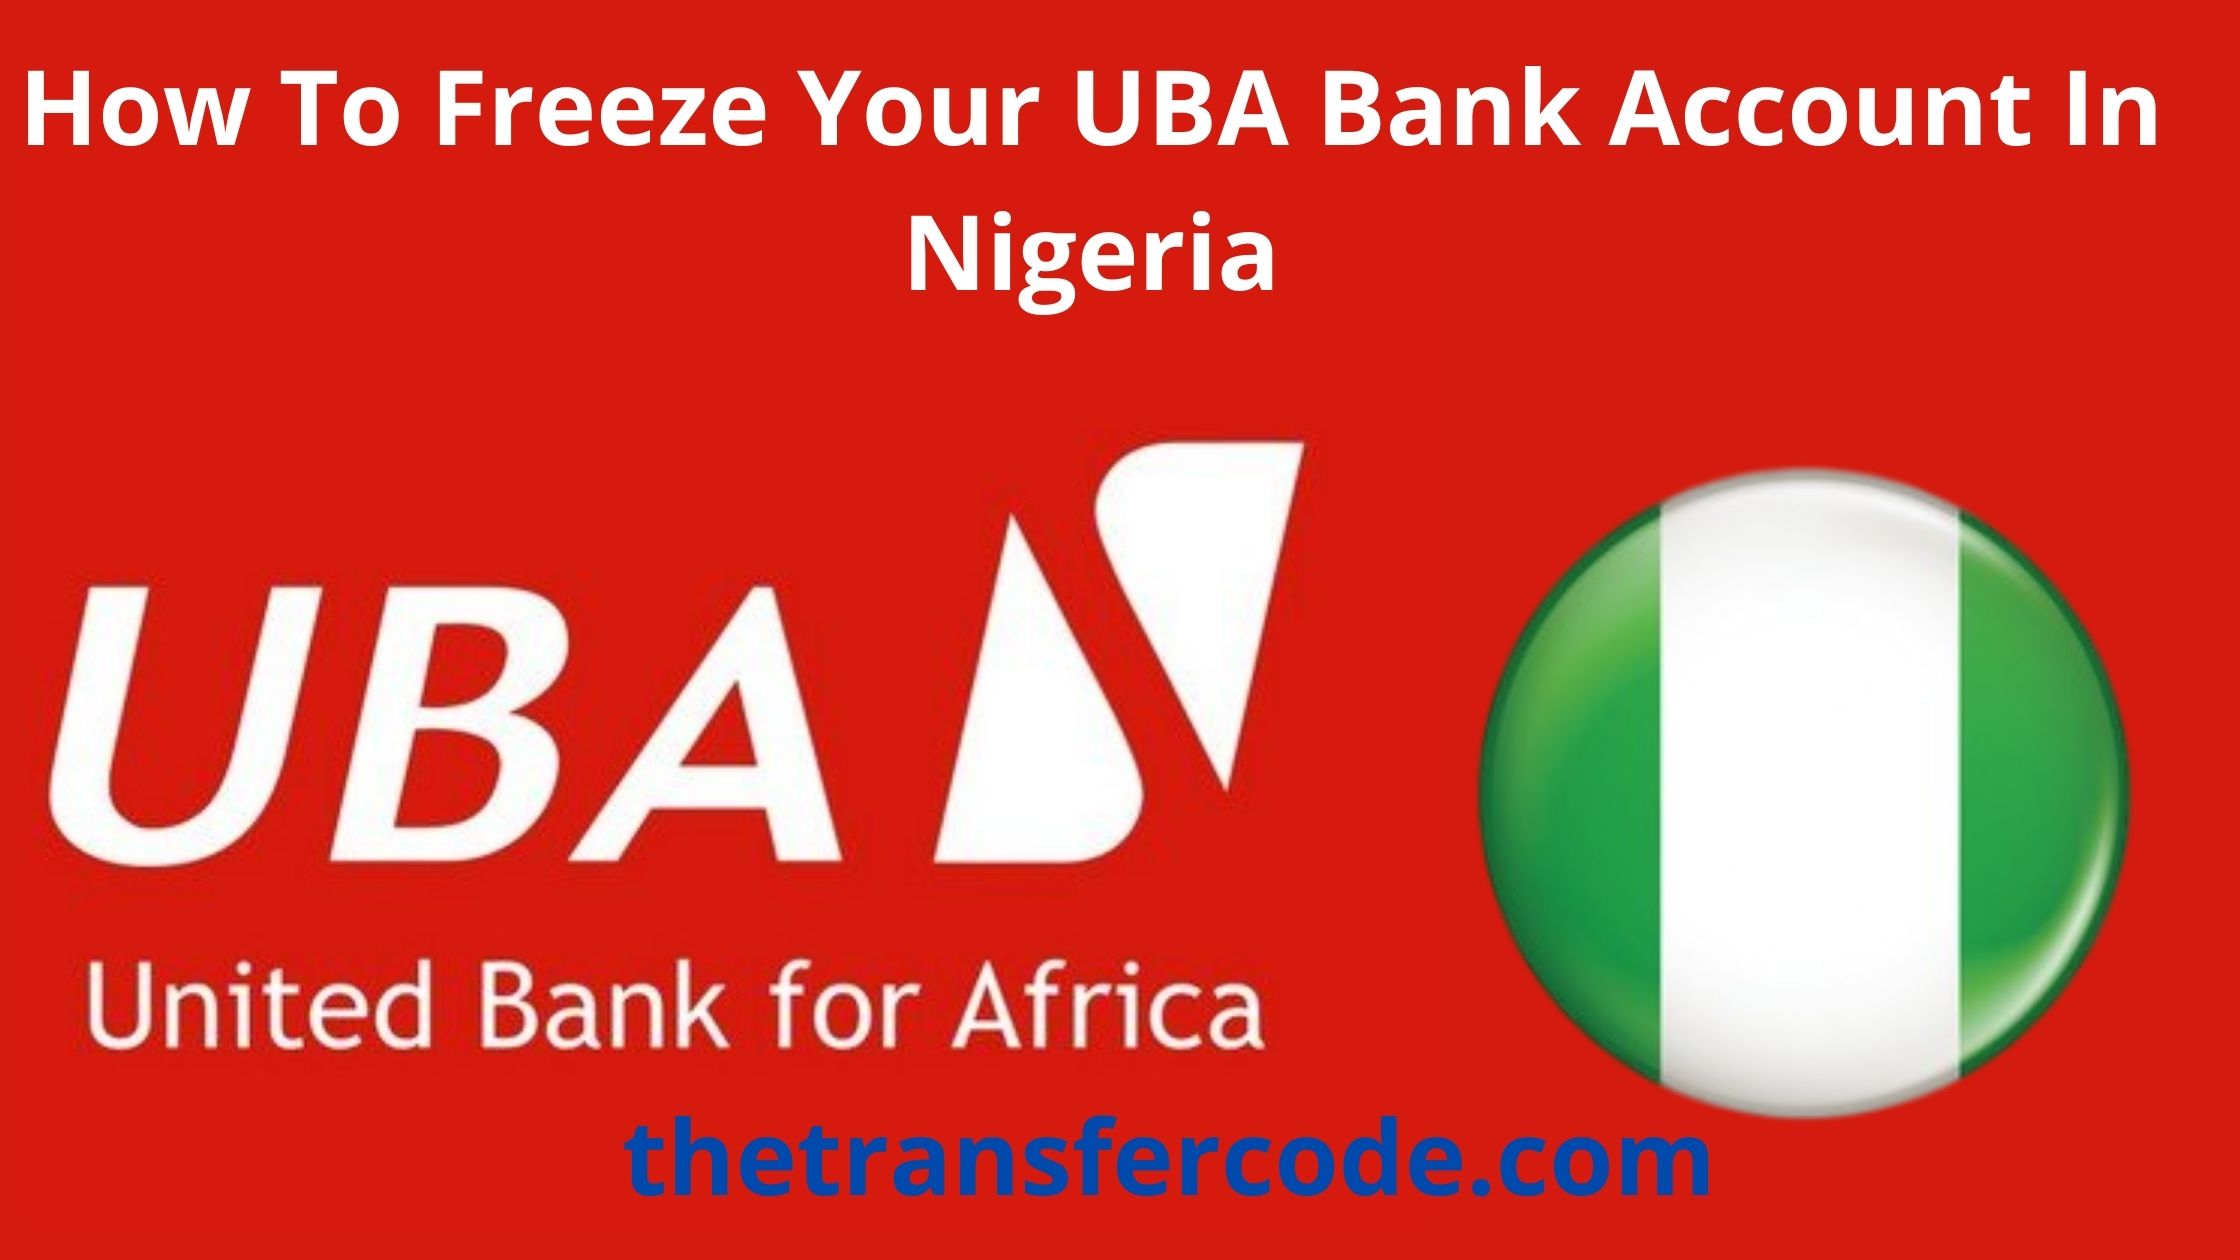 How To Freeze Your UBA Bank Account In Nigeria